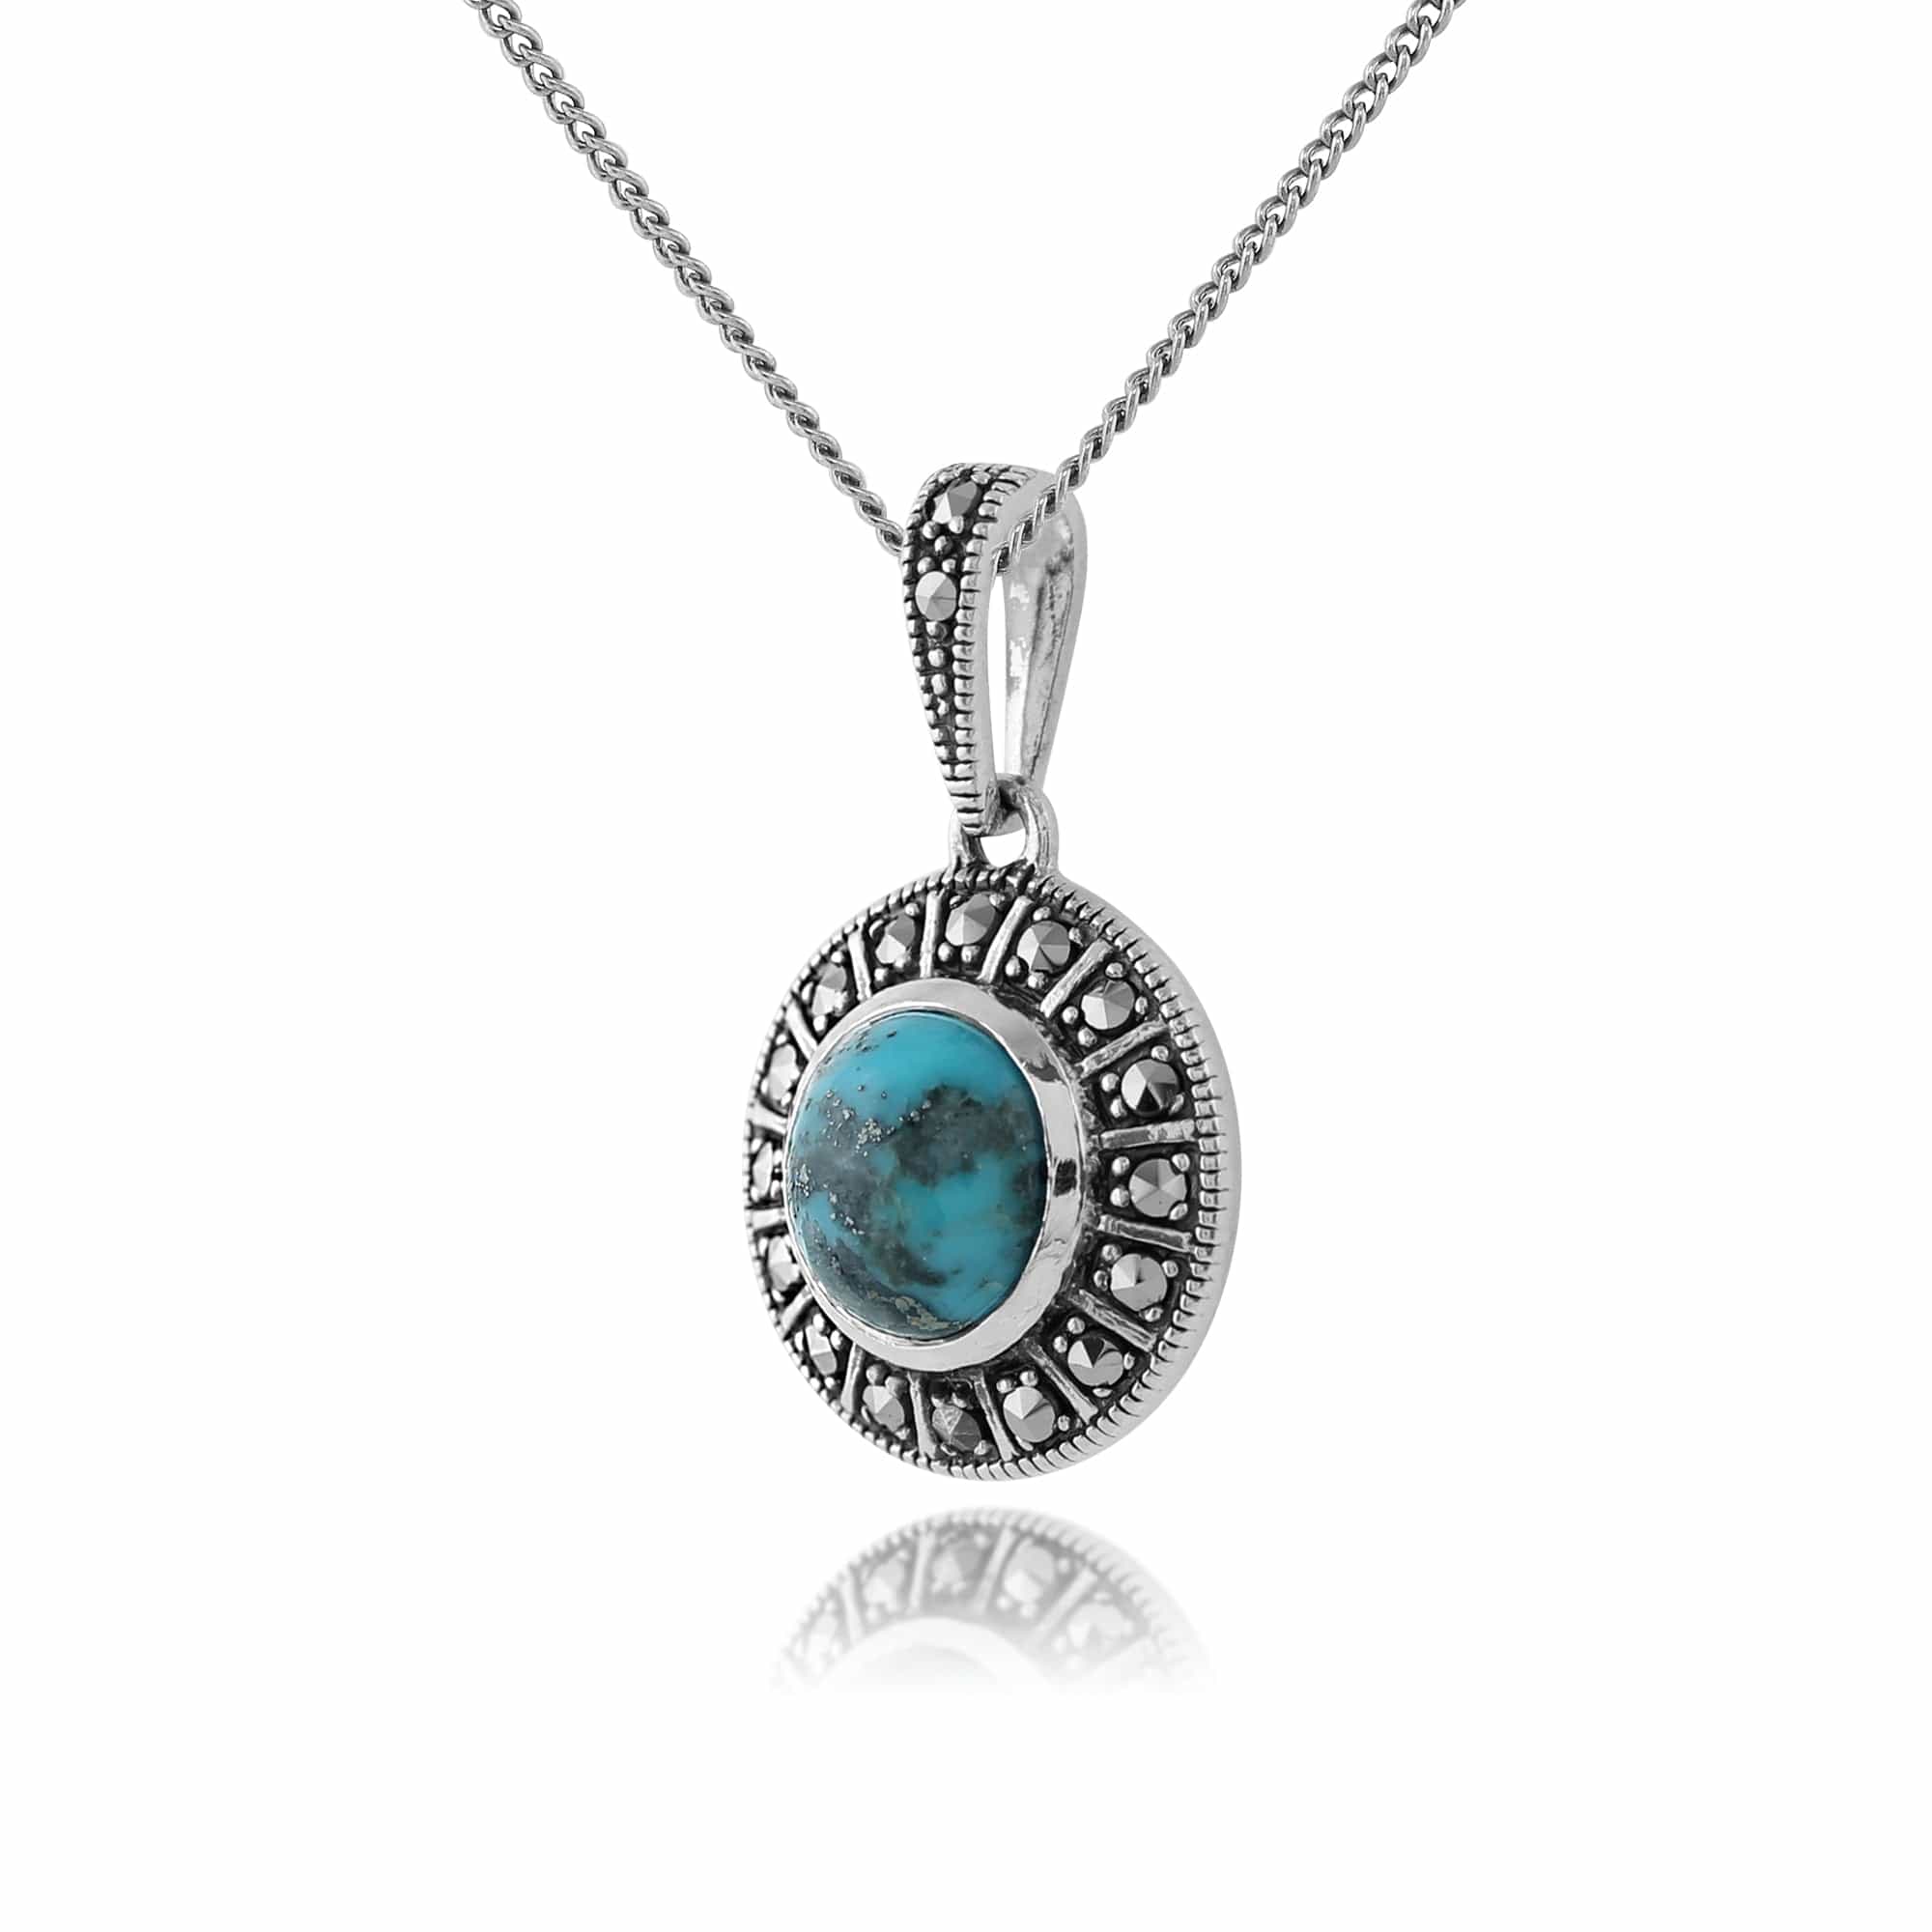 214N646506925 Art Deco Style Round Turquoise Cabochon & Marcasite Pendant in 925 Sterling Silver 2